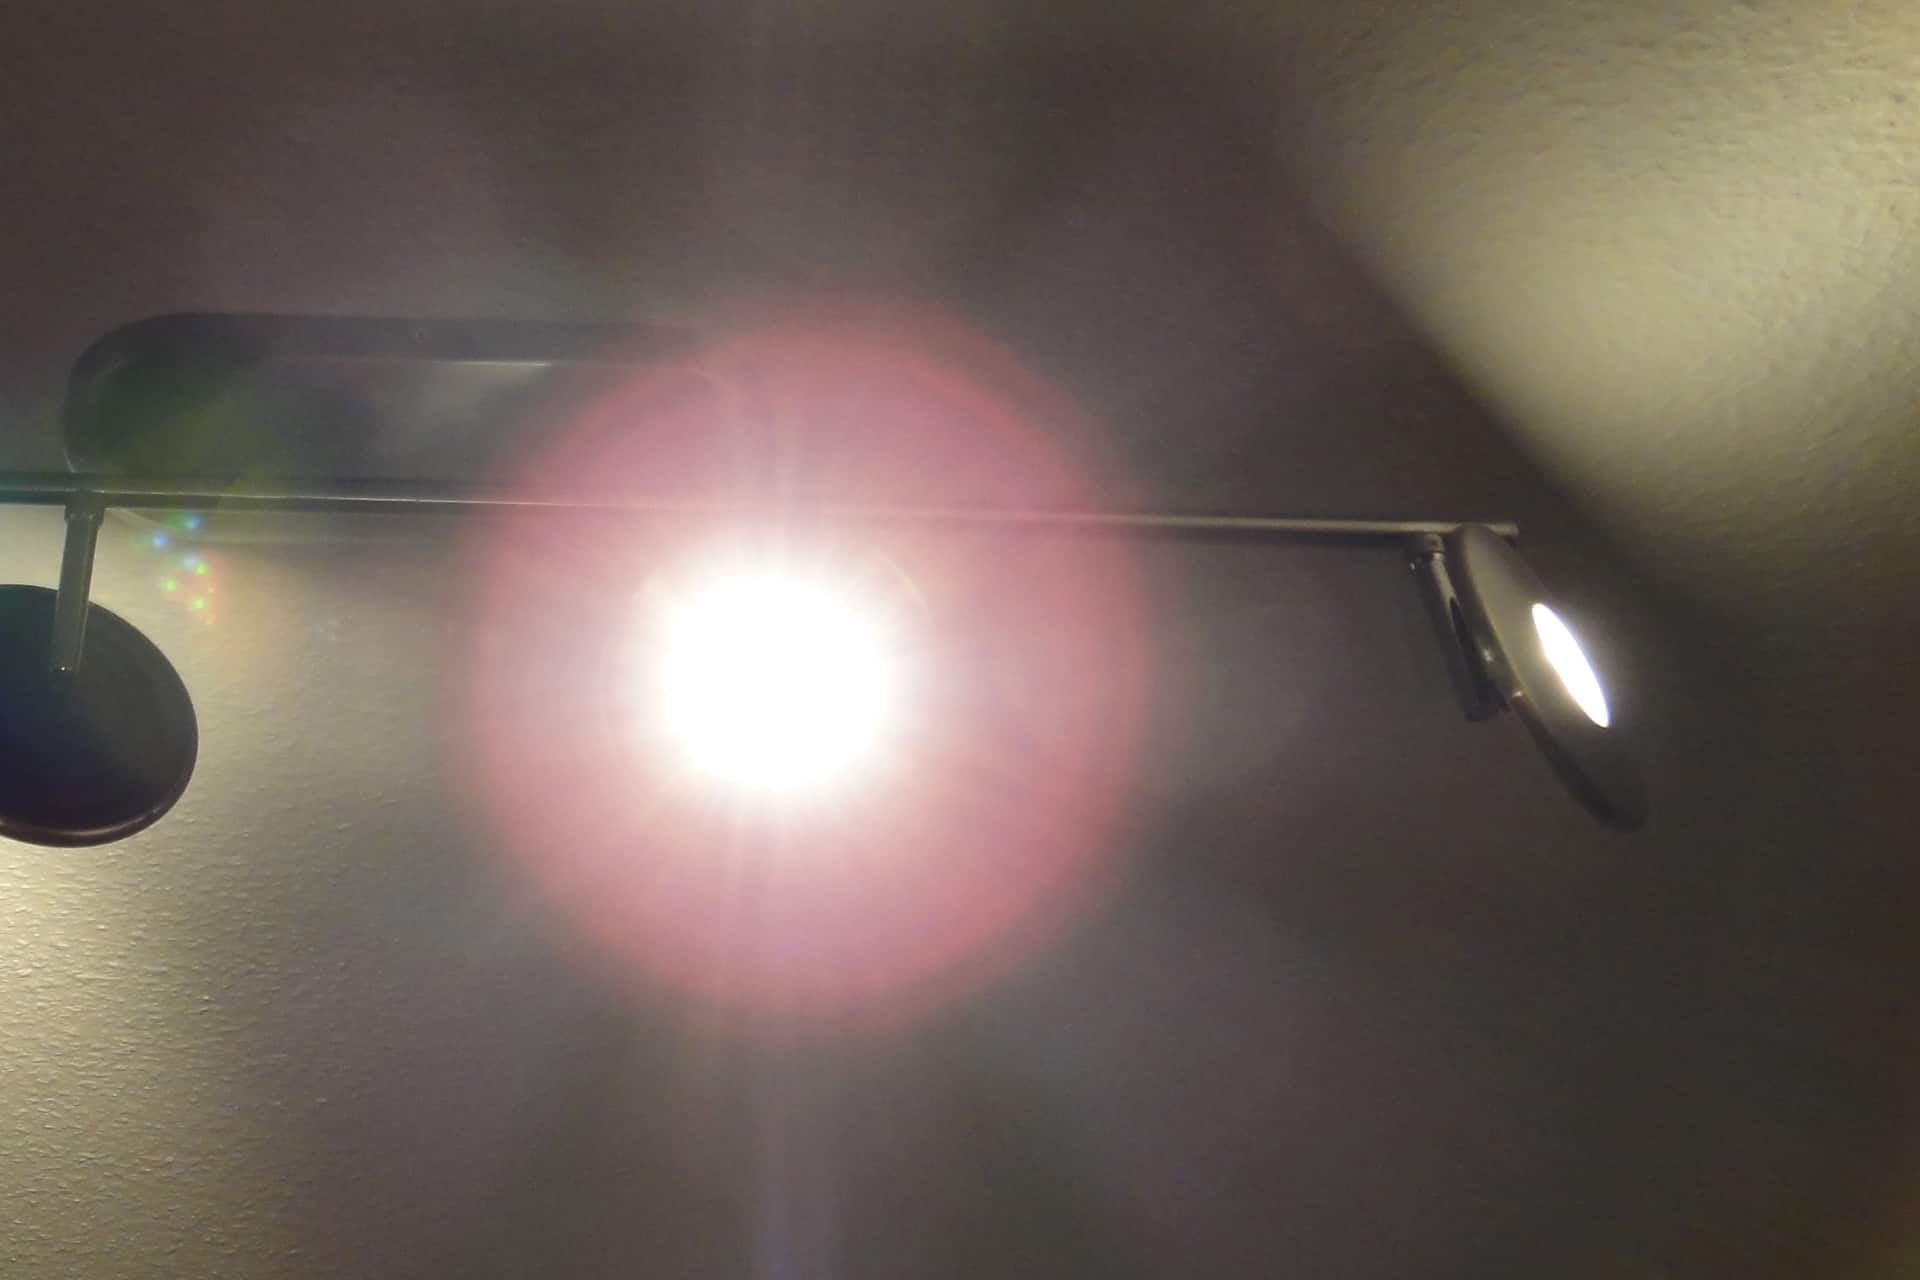 Led Lights Too Bright How To Reduce The Blinding Lamphq